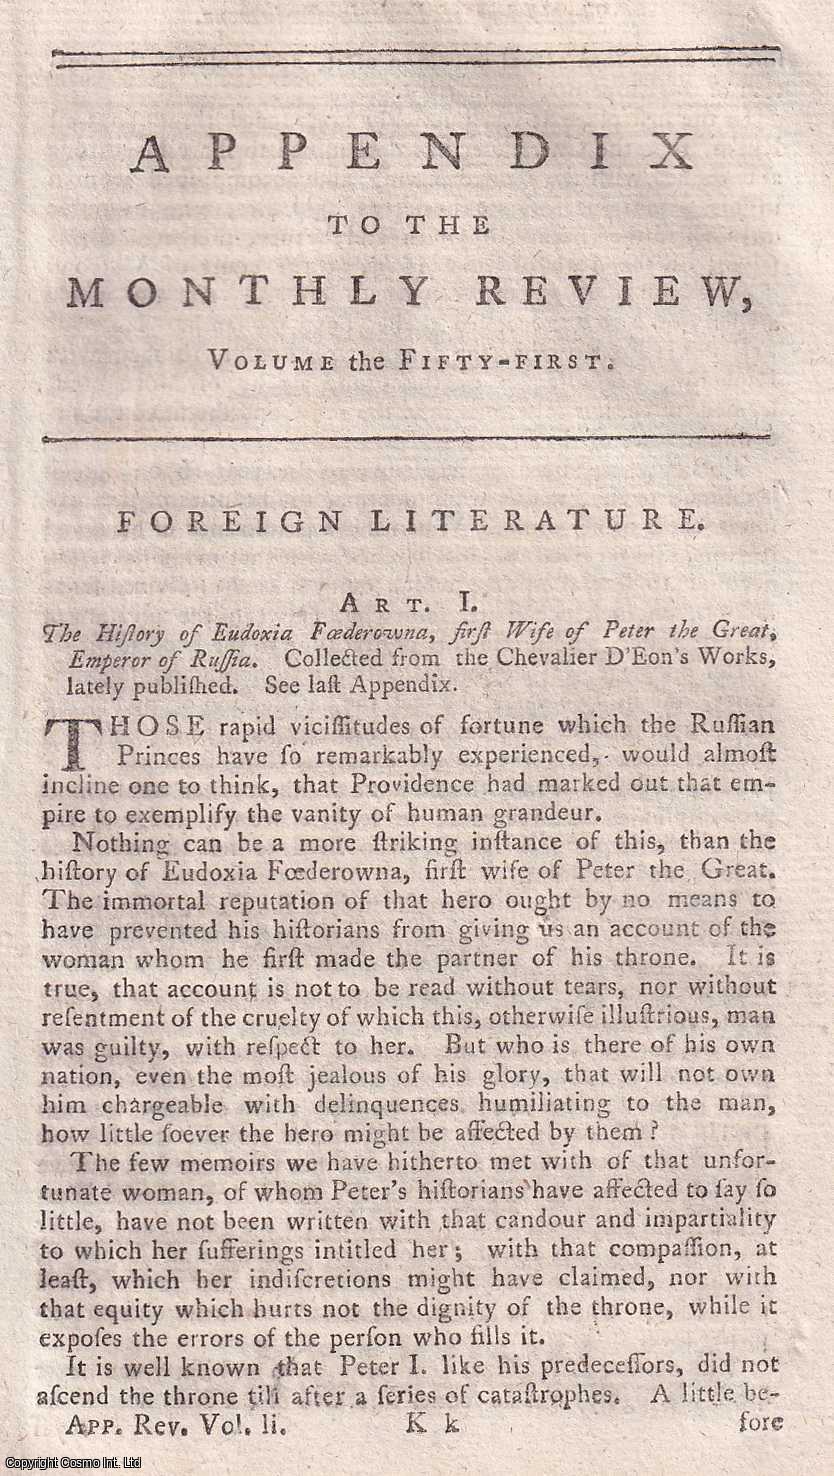 Author Not Stated - The History of Eudoxia Feodorovna, first Wife of Peter the Great, Emperor of Russia. An original essay from the Monthly Review, 1774. No author is given for this article.